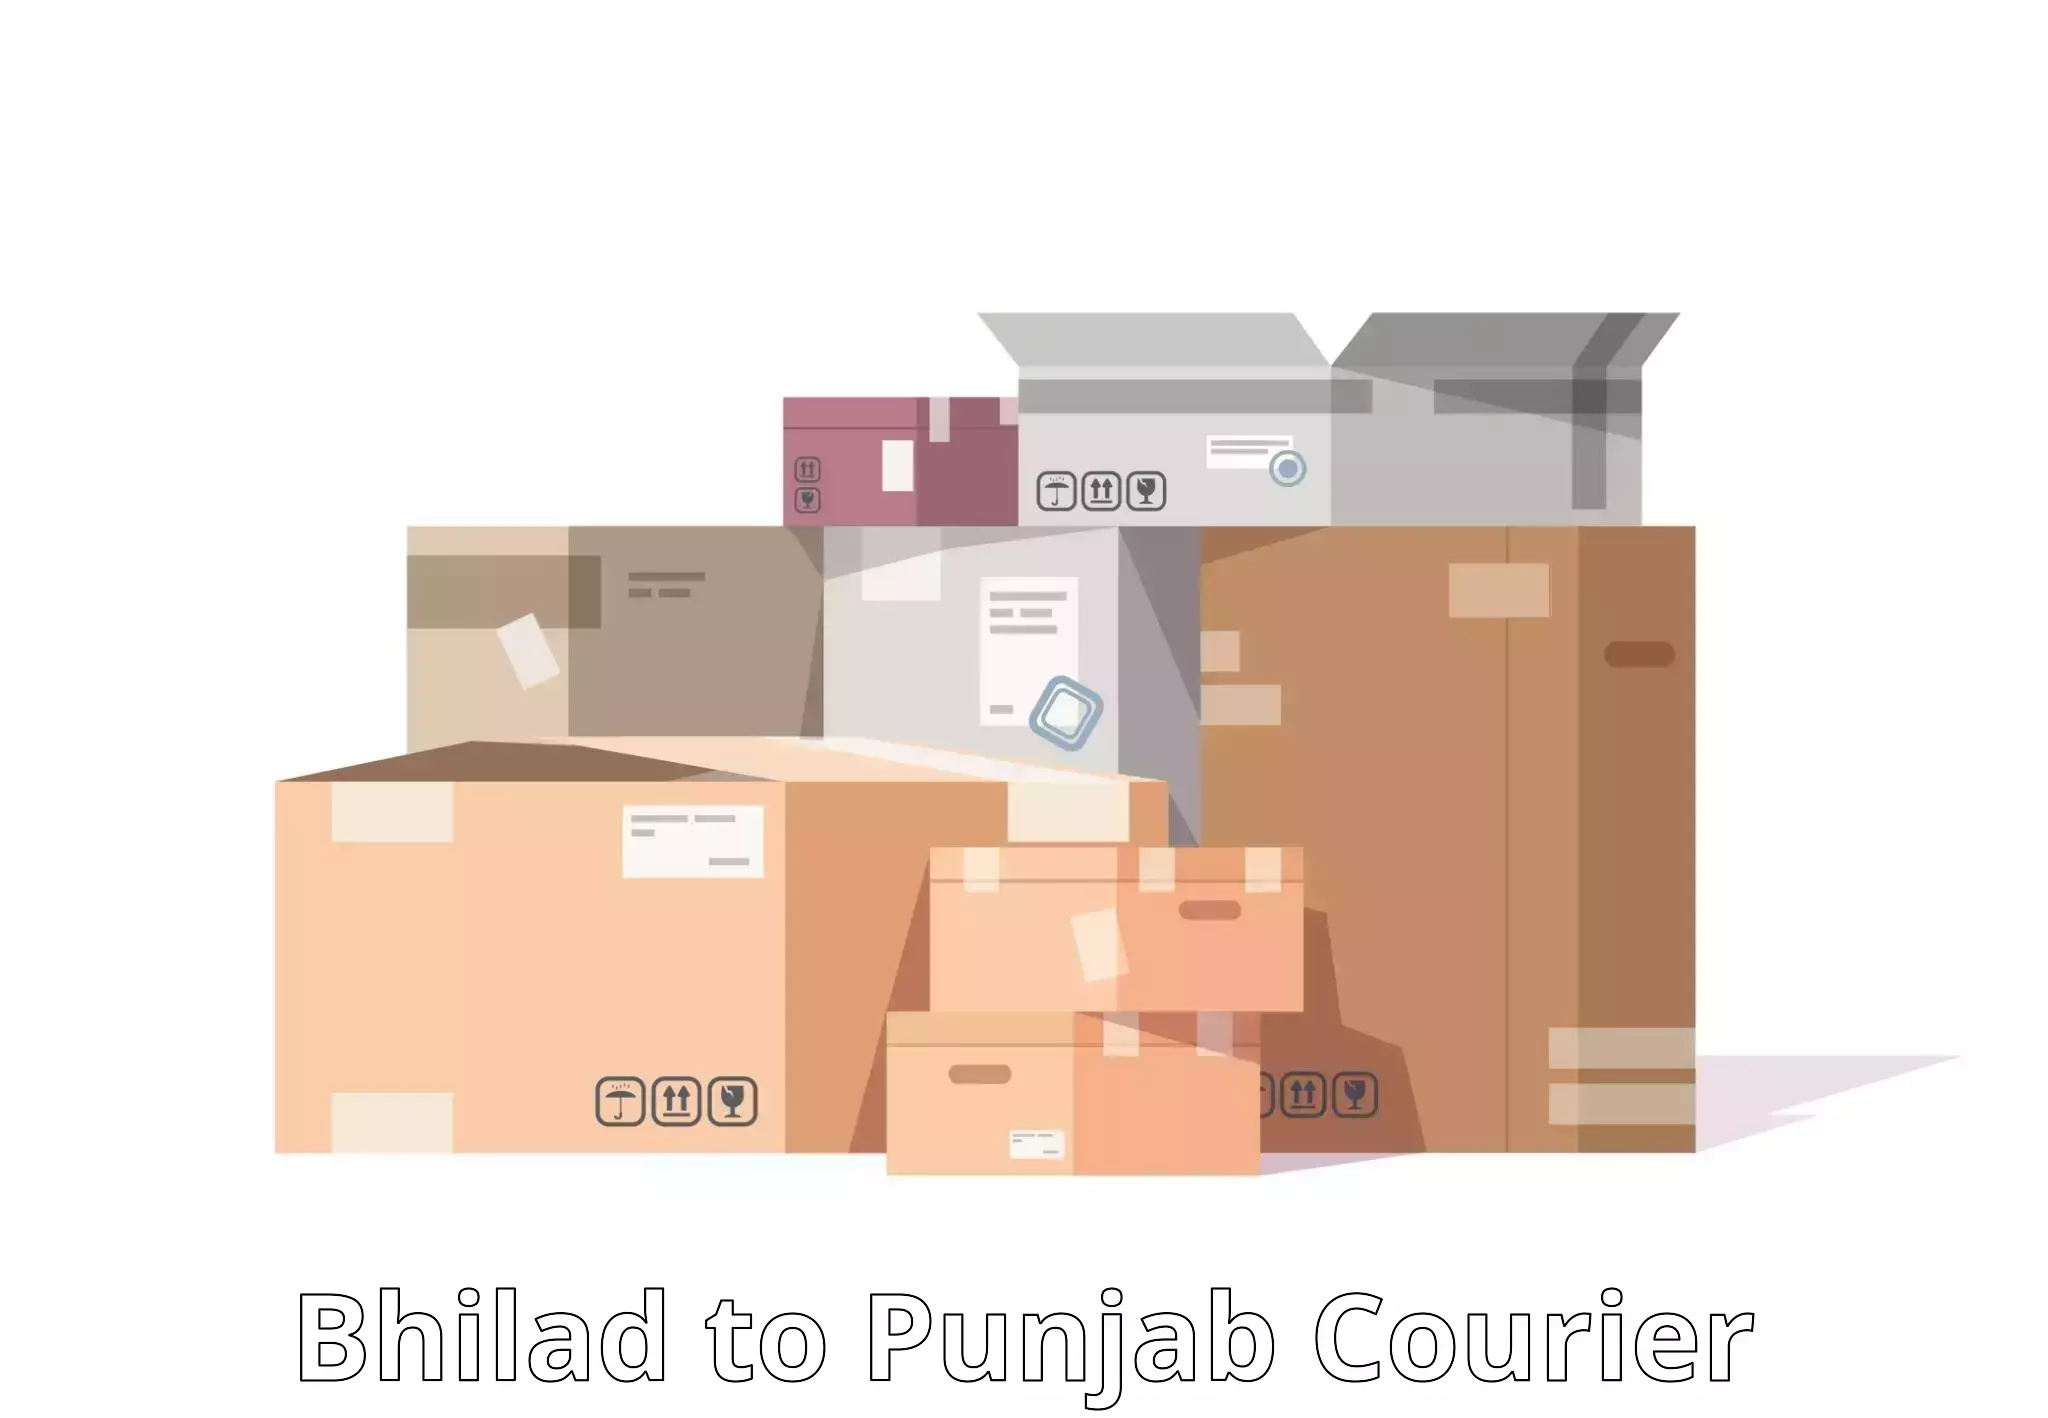 Package consolidation Bhilad to Mohali